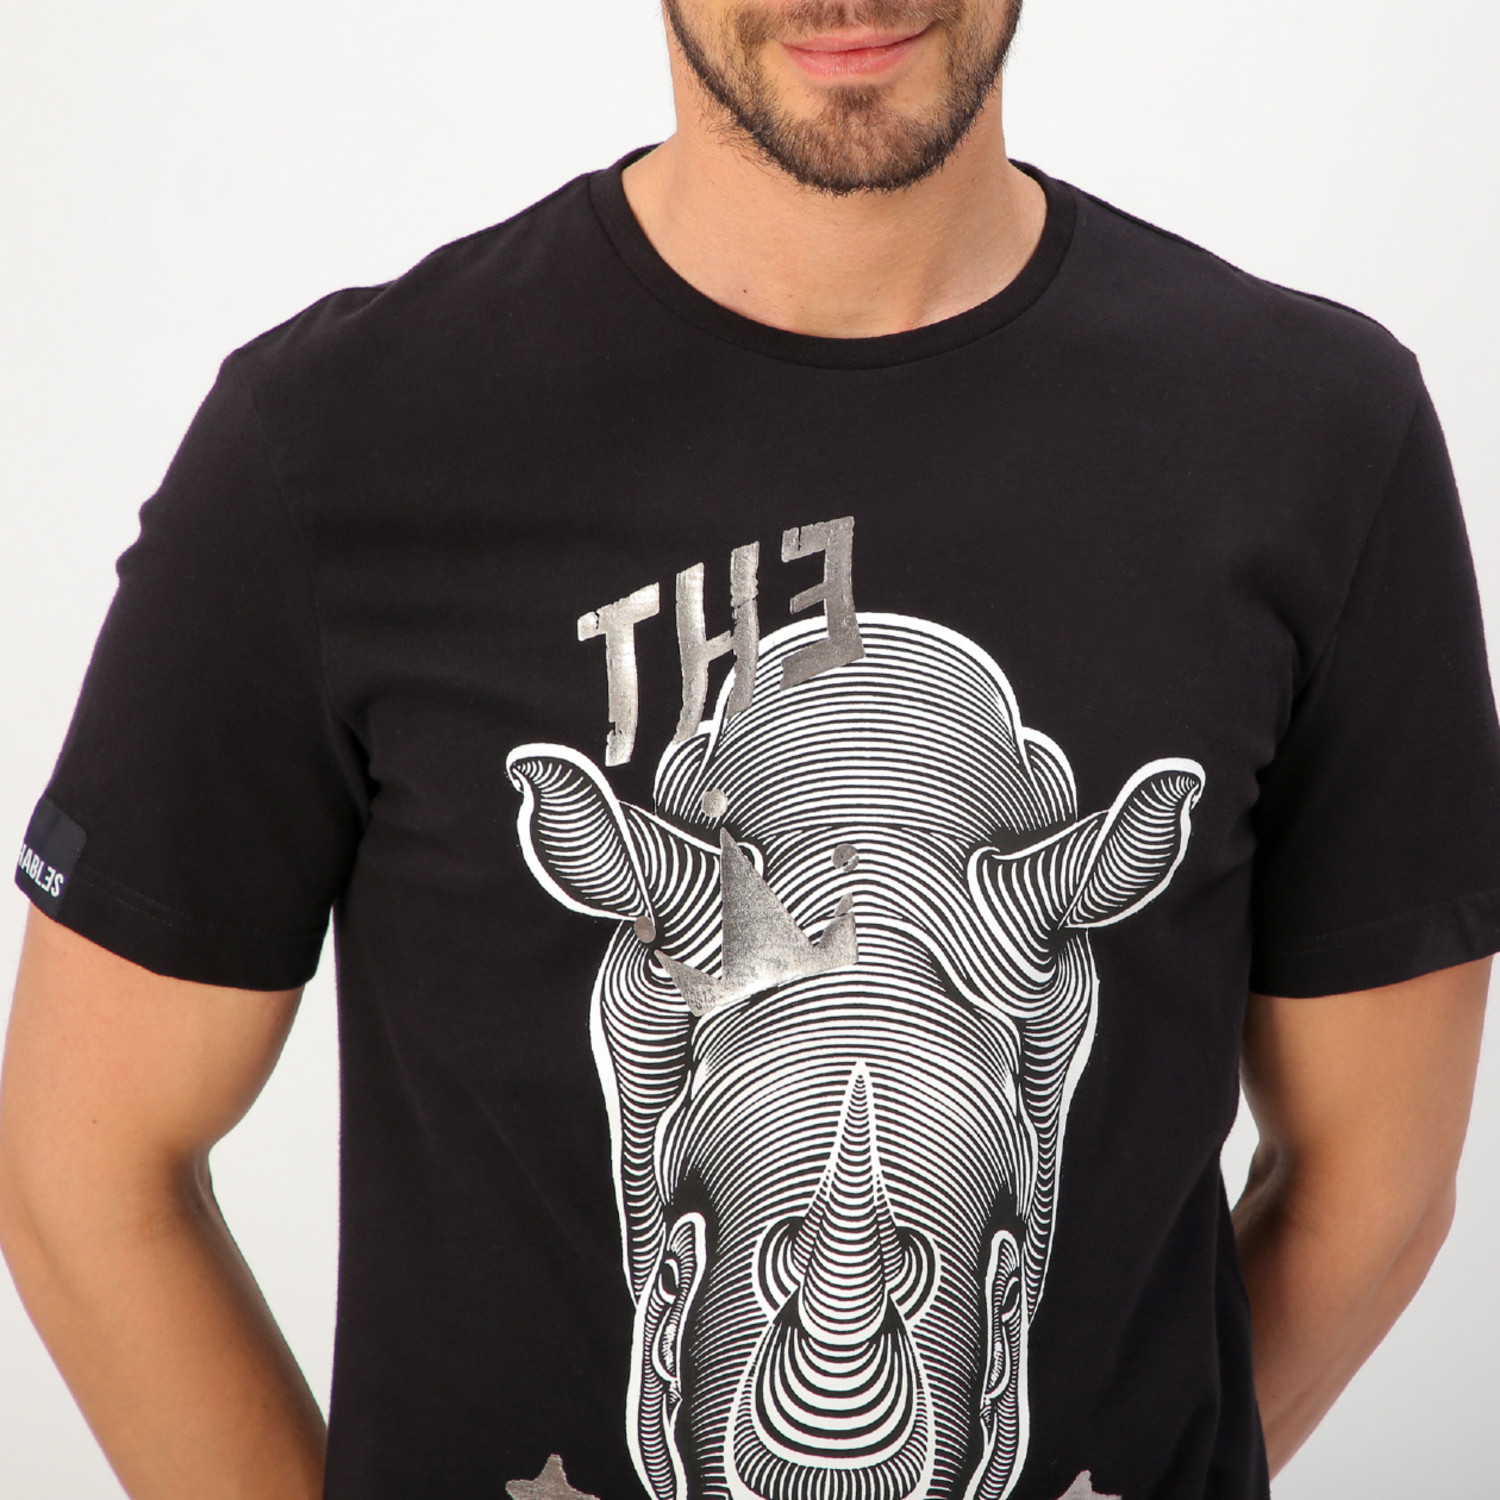 Rino T-Shirt // Black (XS) - The Untouchables - Touch of Modern